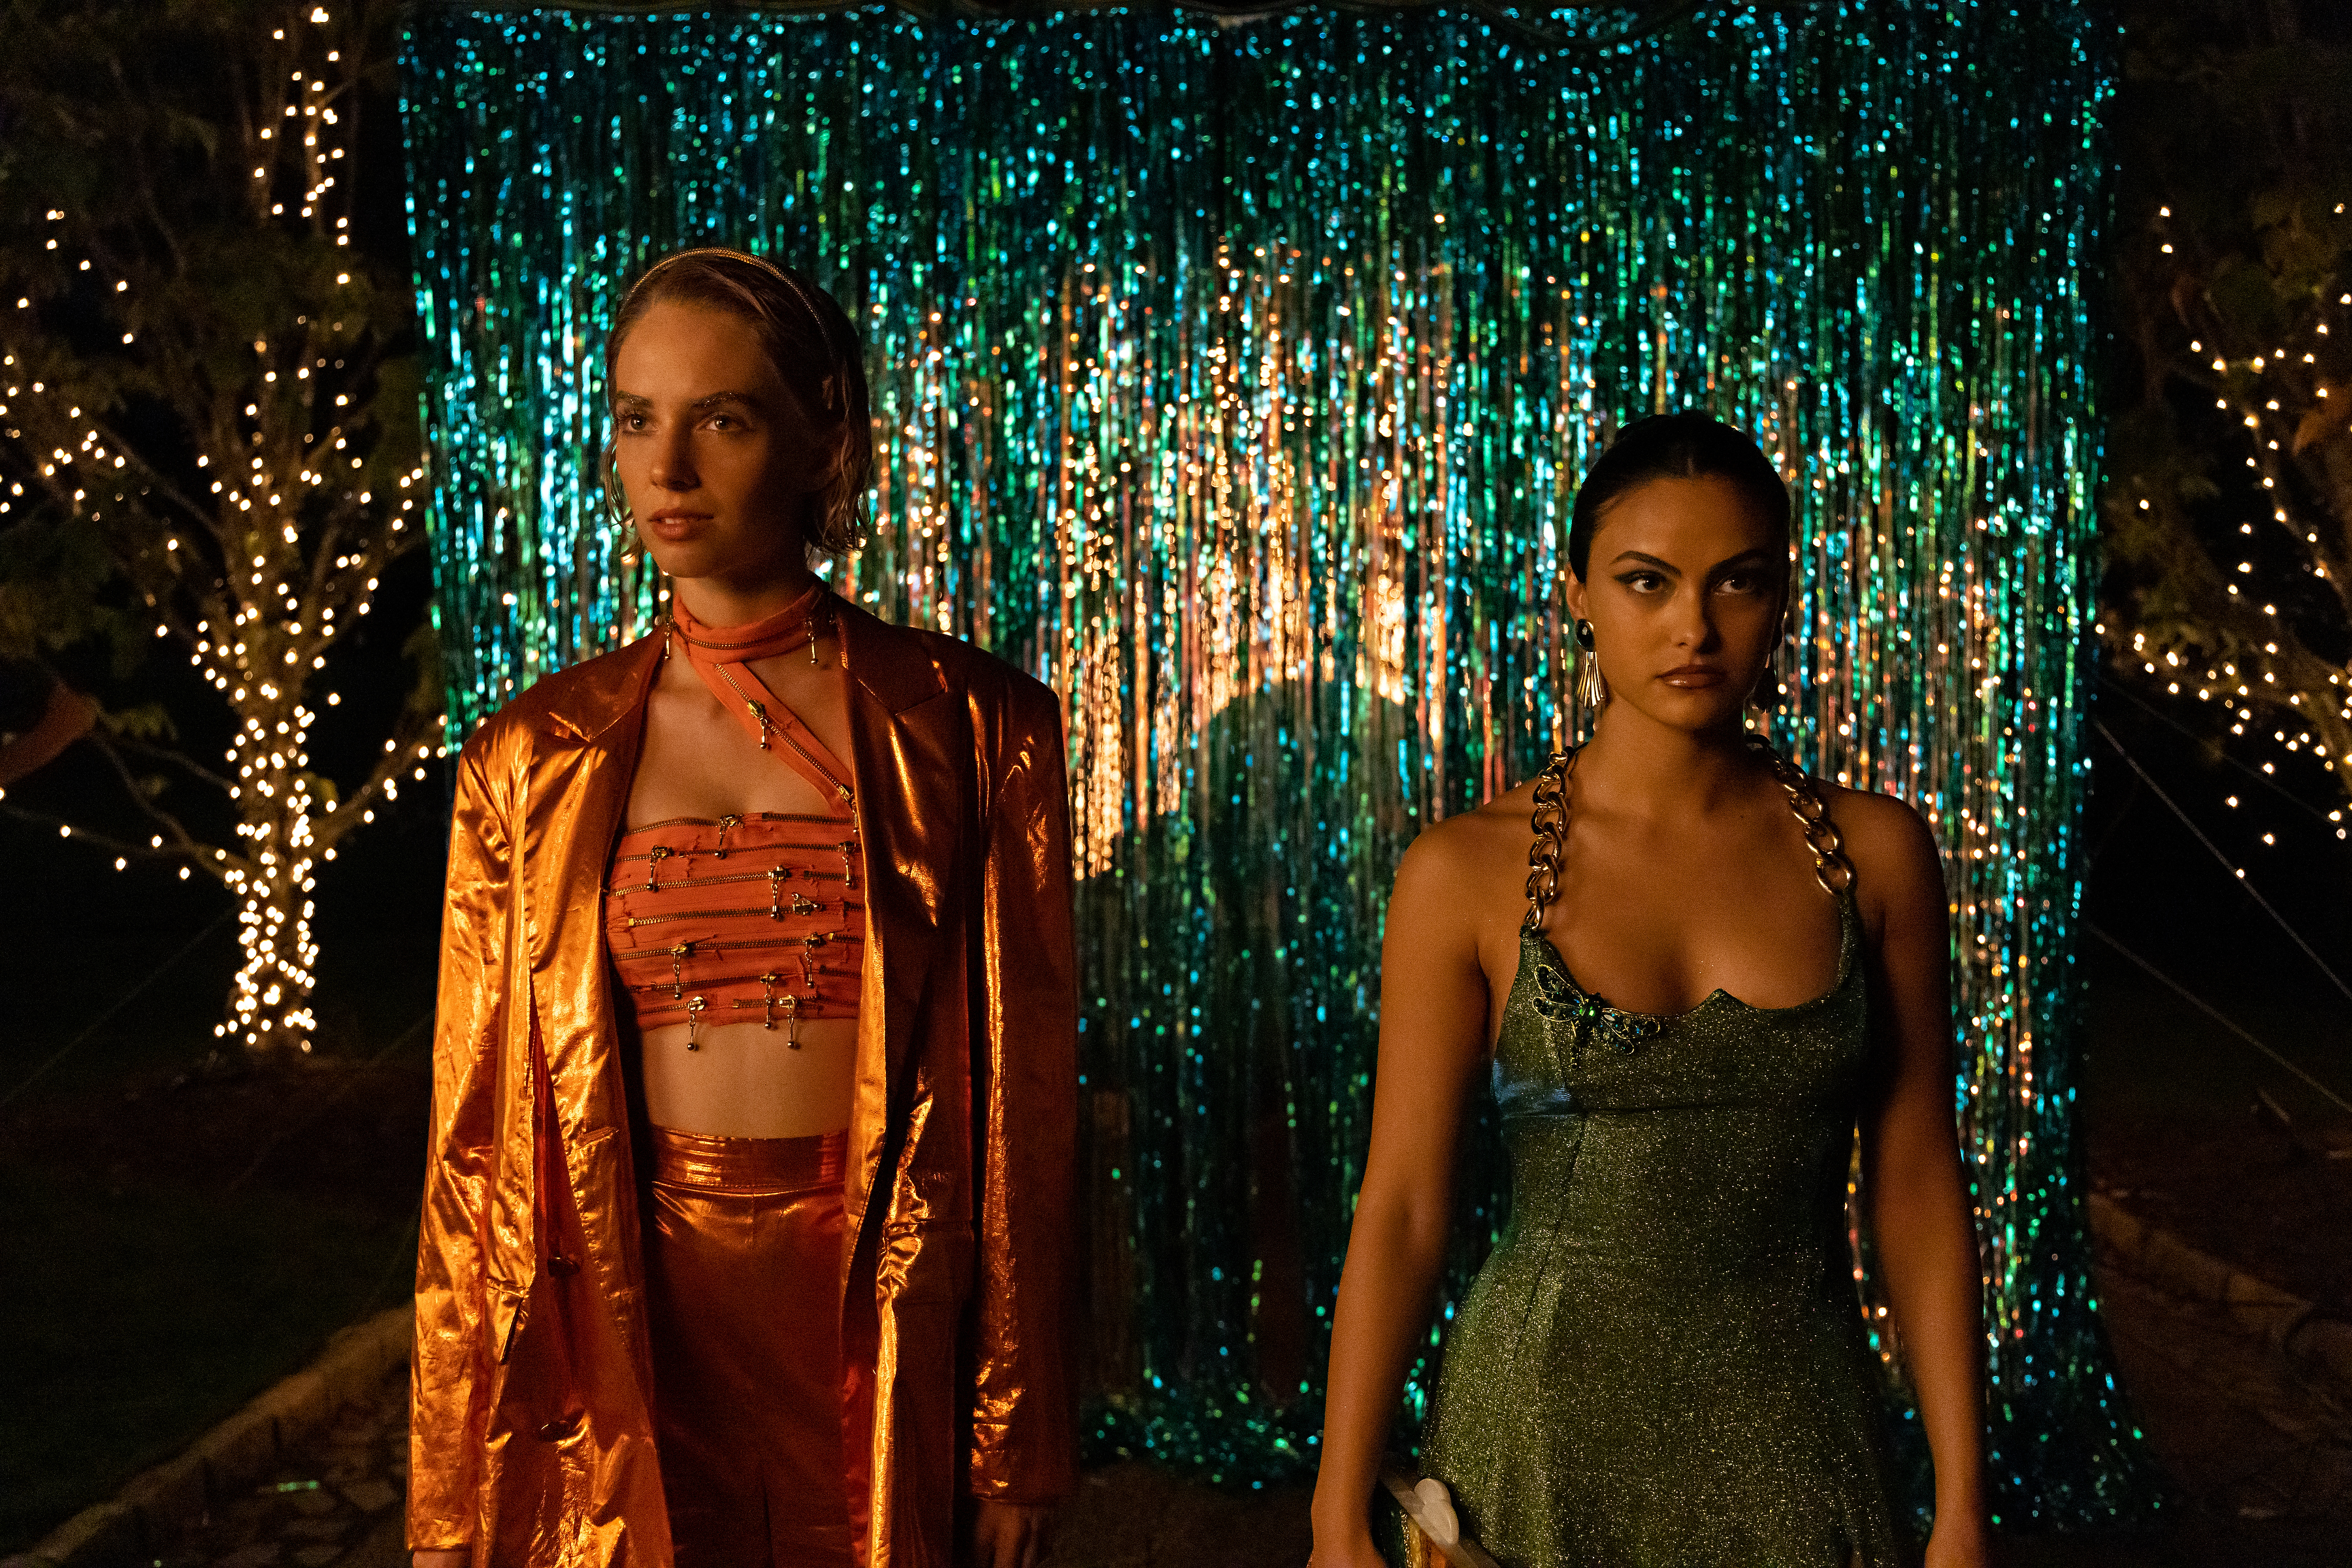 maya hawke dressed in golden outfit next to camila mendes in a green dress. both are in front of a sparkly backdrop